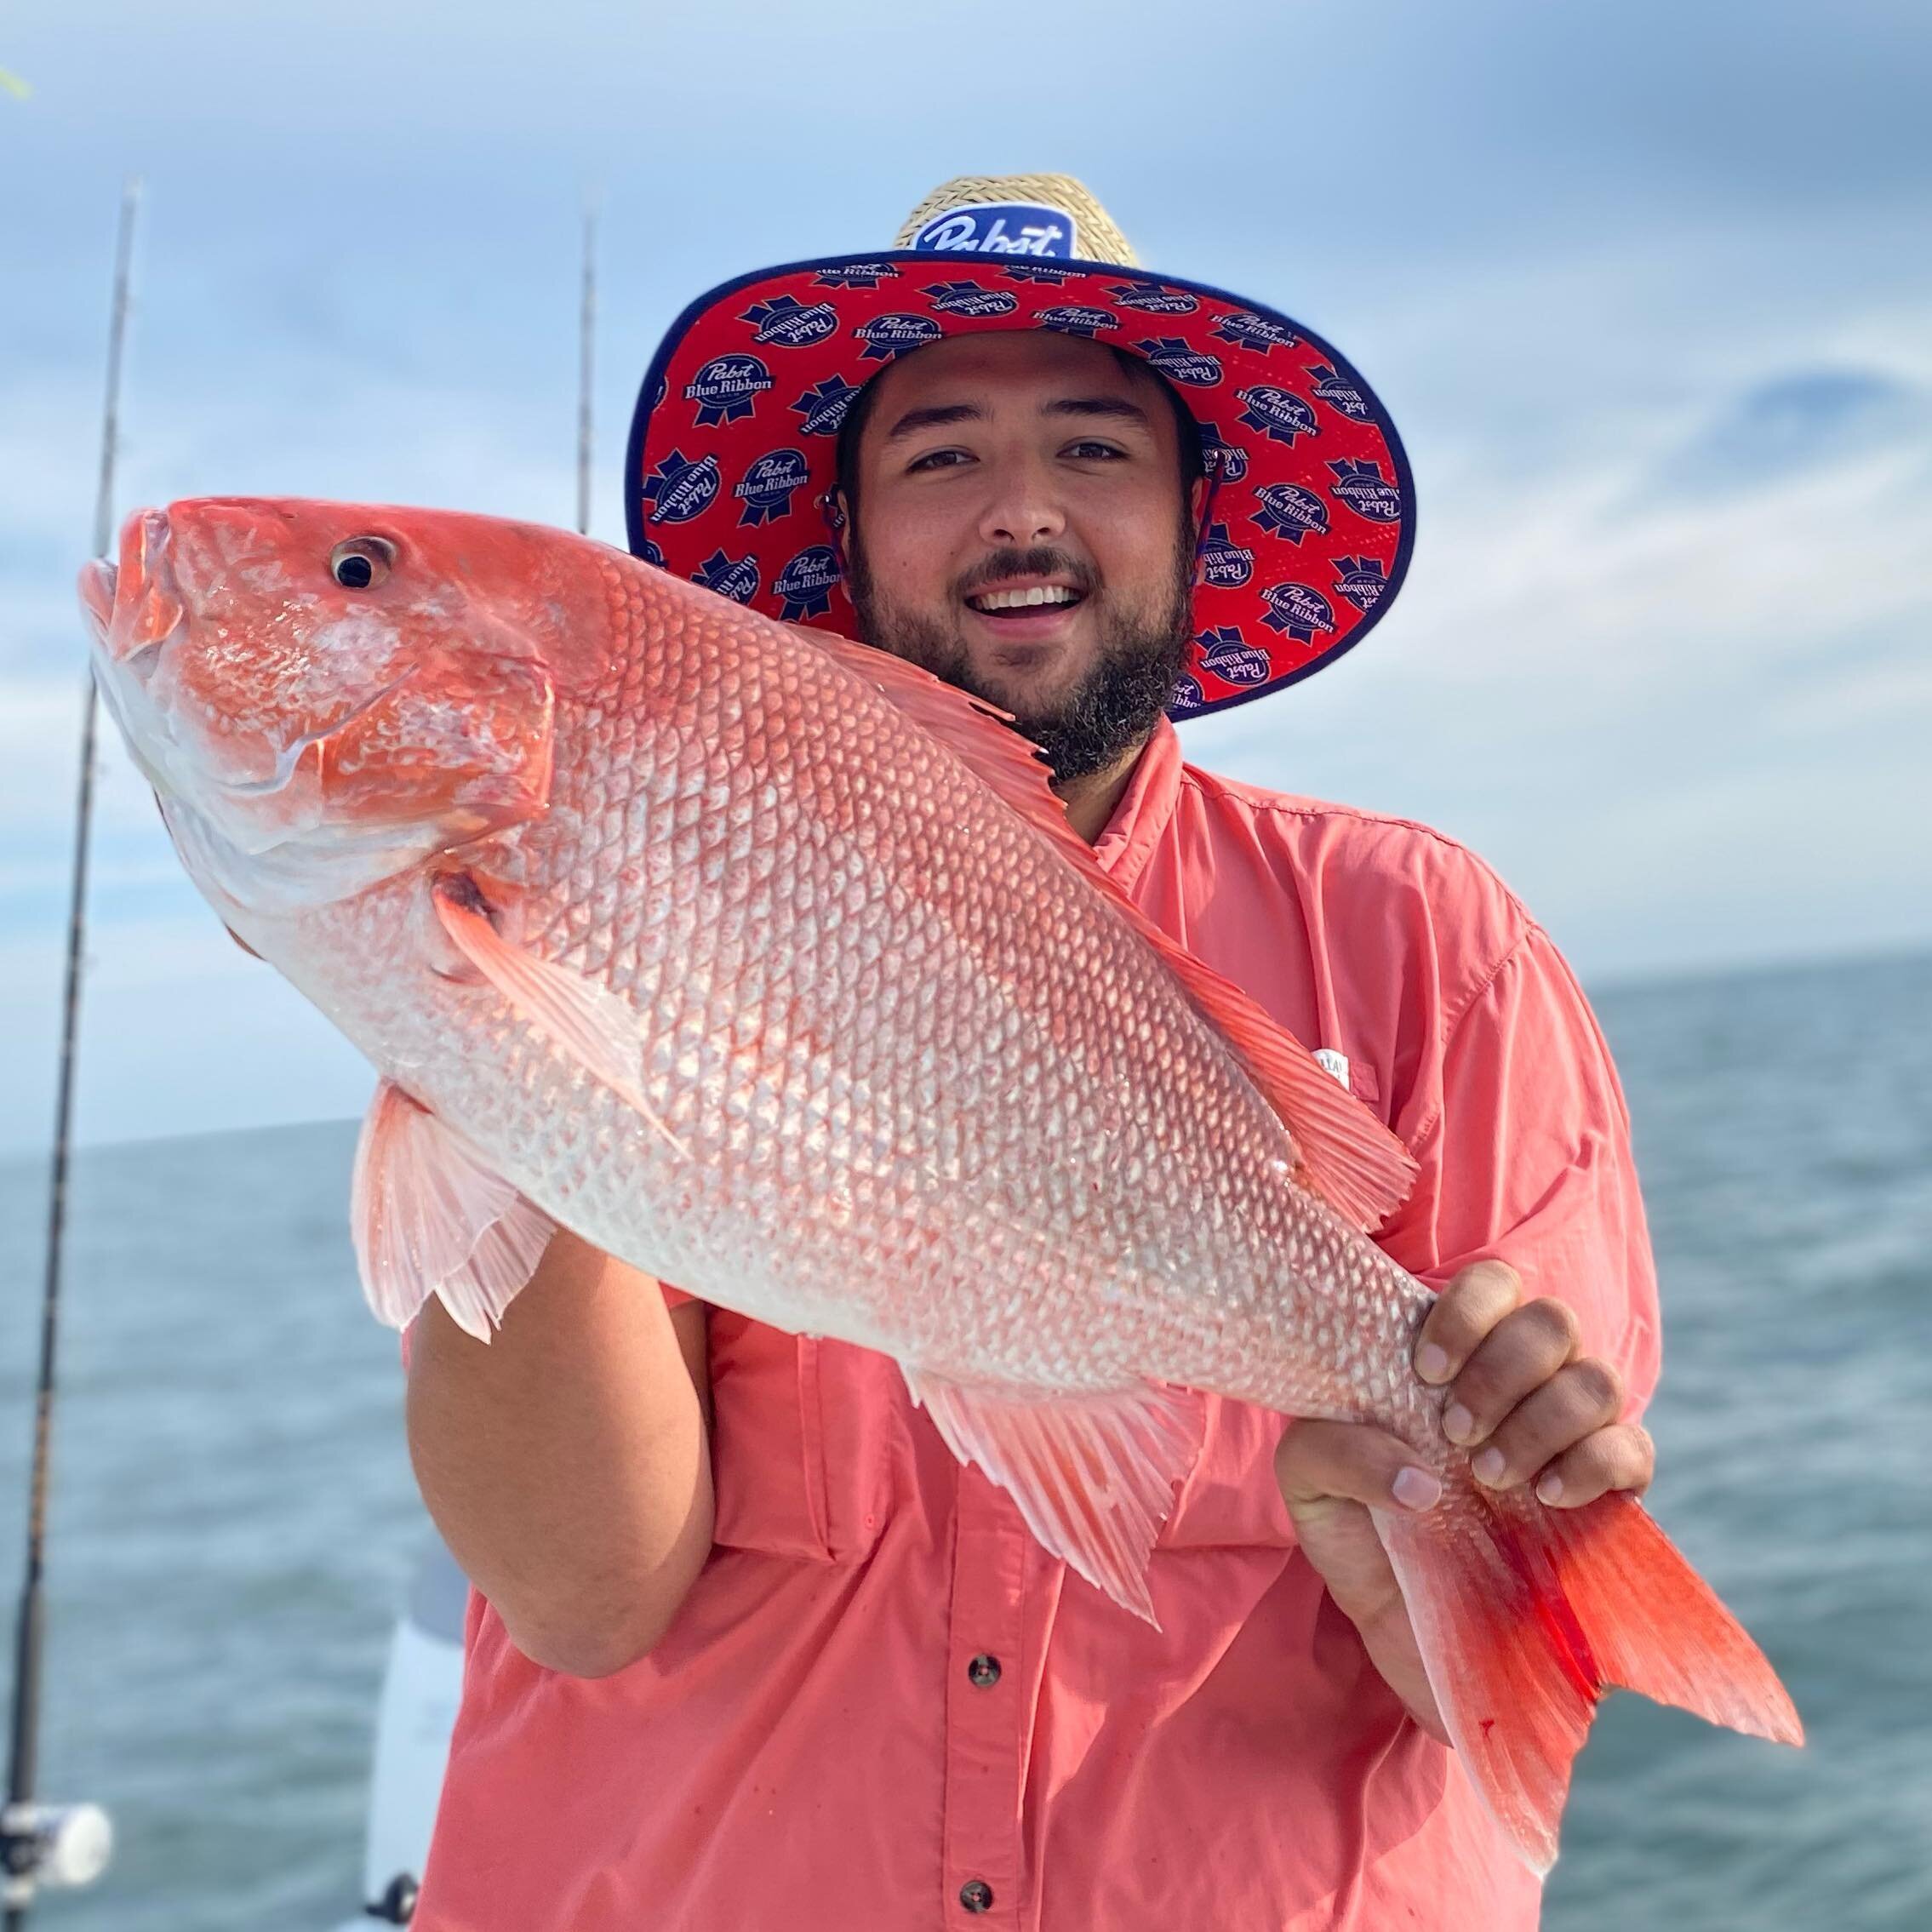 Always a good time getting a quick workout with some Red Snapper! While the unfortunate politics that surround this species causes moans and groans. It goes to show how privileged our Florida fisheries are. While the bag limit may be 0 there is no be